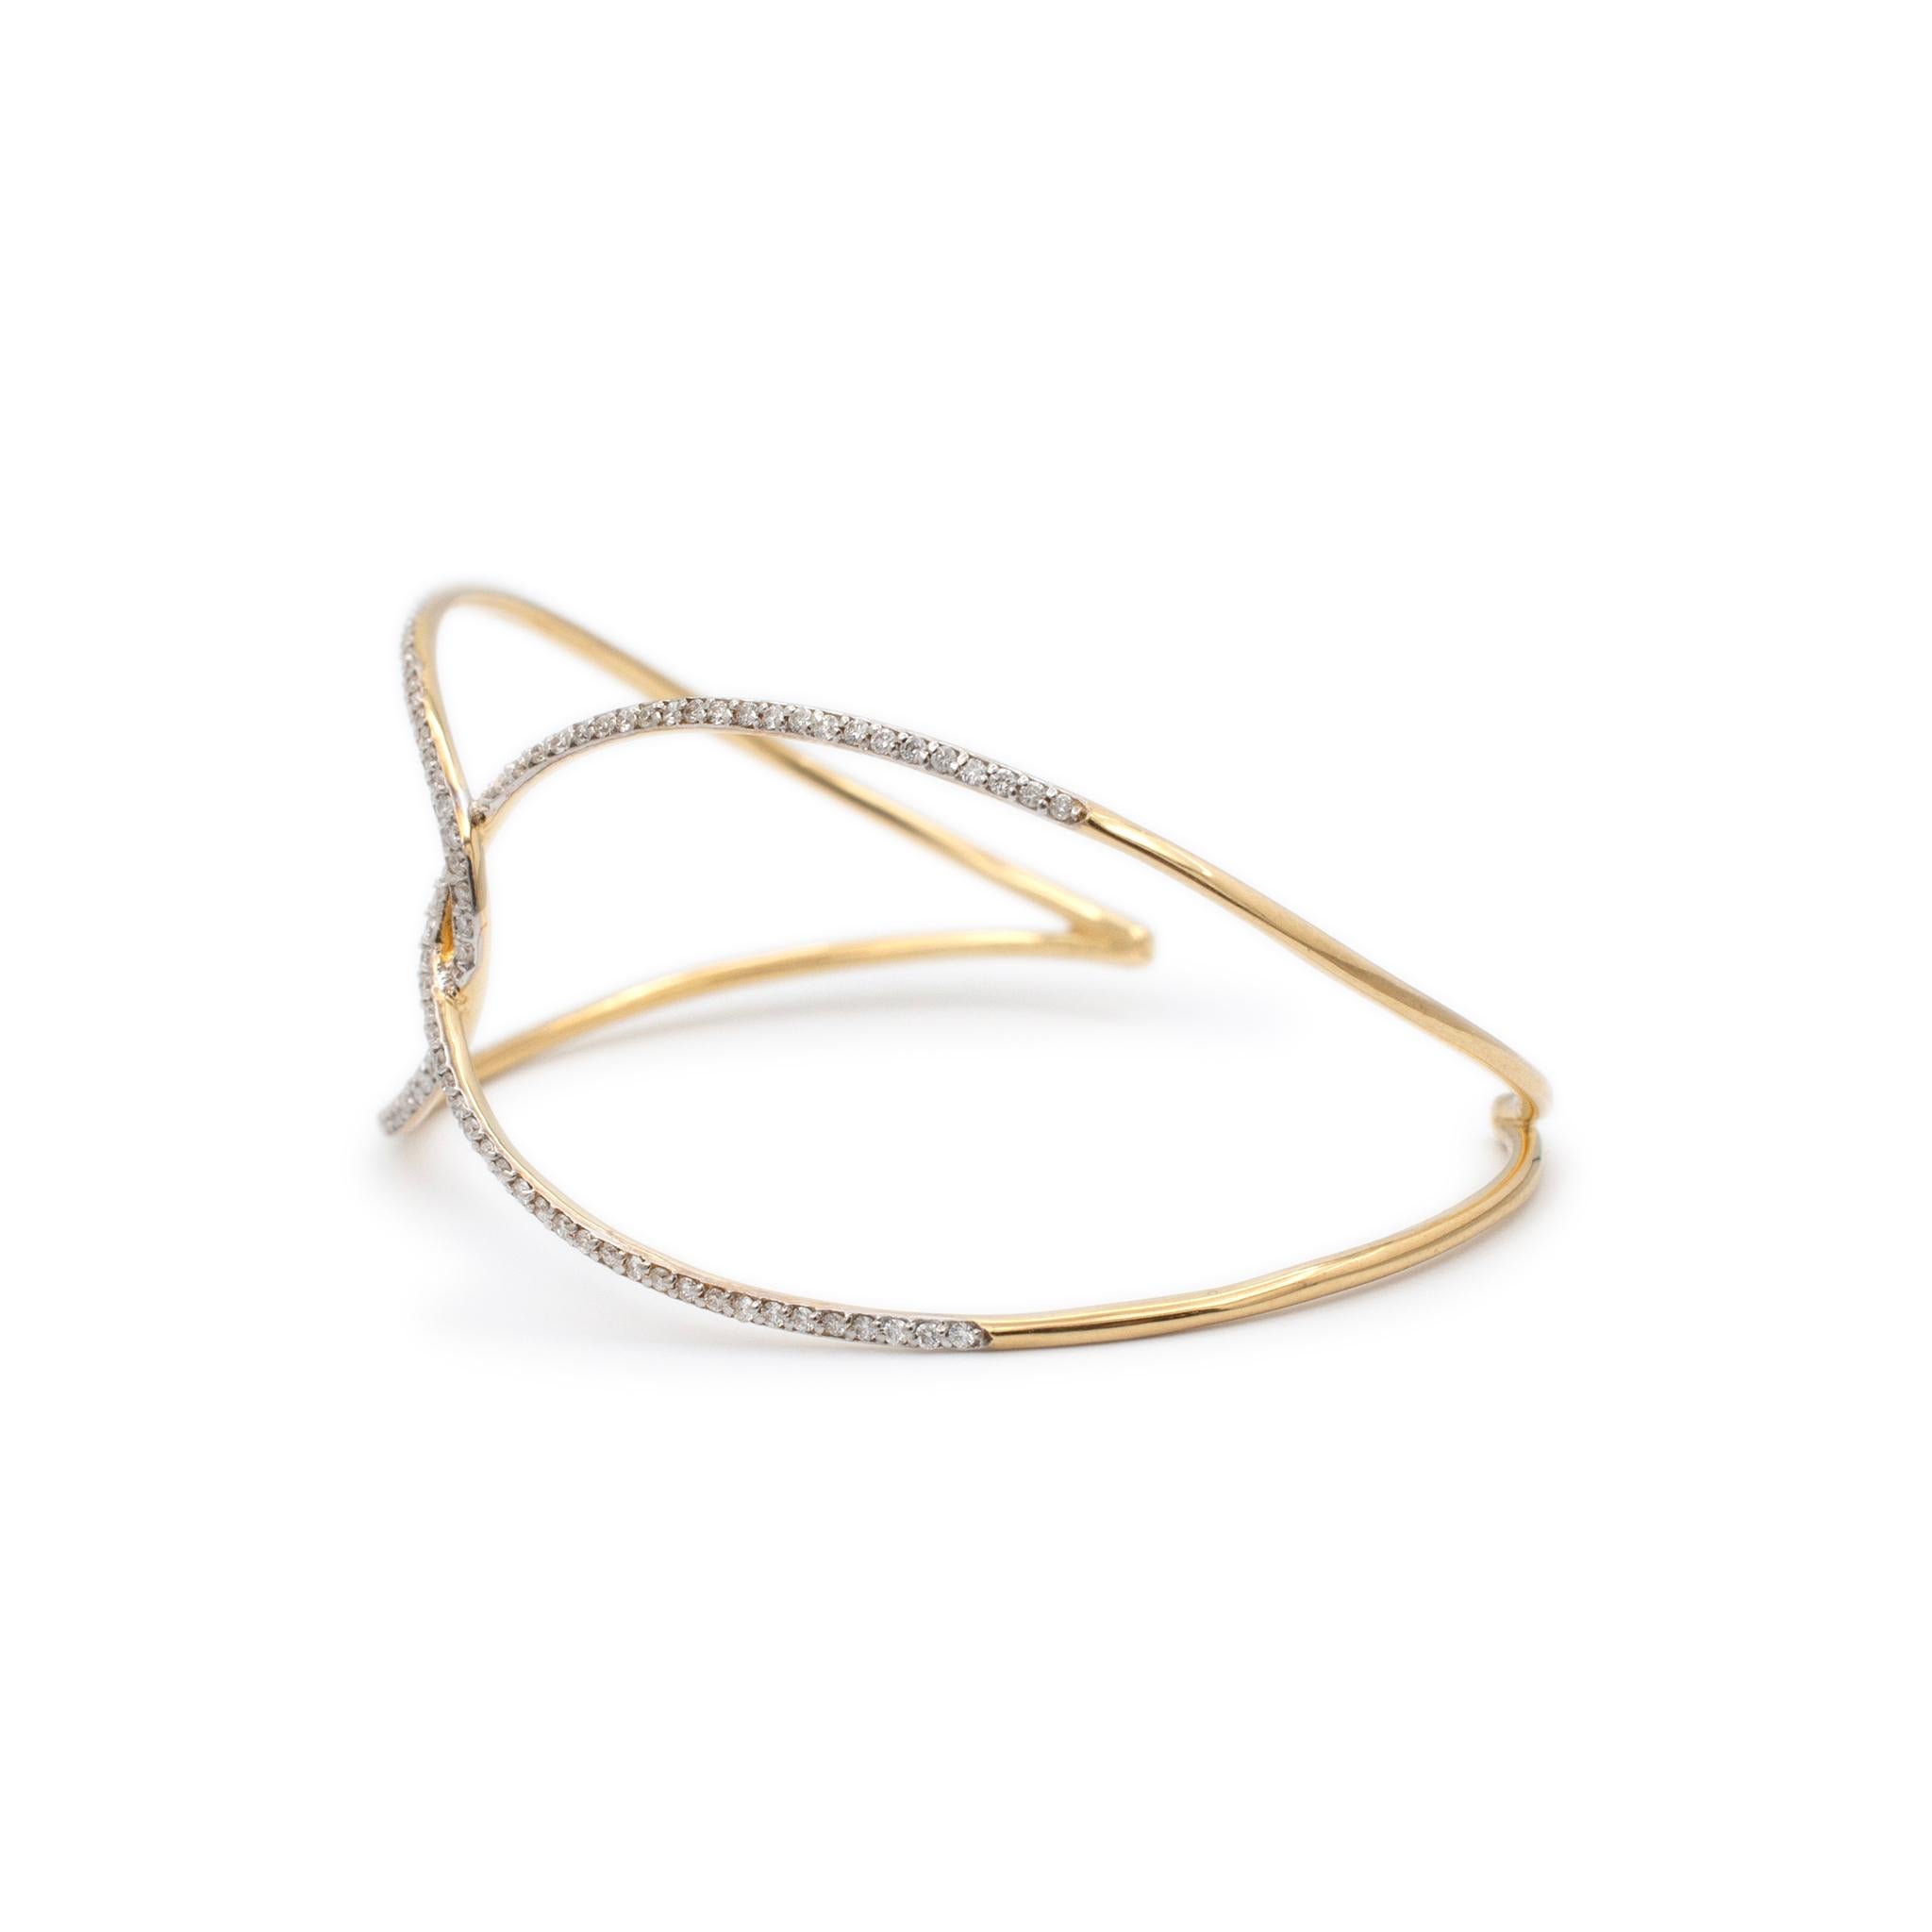 Gender: Ladies

Metal Type: 18K Yellow Gold

Length: 6.00 Inches

Width: 26.00 mm

Weight: 8.45 grams

18K yellow gold diamond cuff bracelet. The metal was tested and determined to be 18K yellow gold.

Pre-owned in excellent condition. Might show